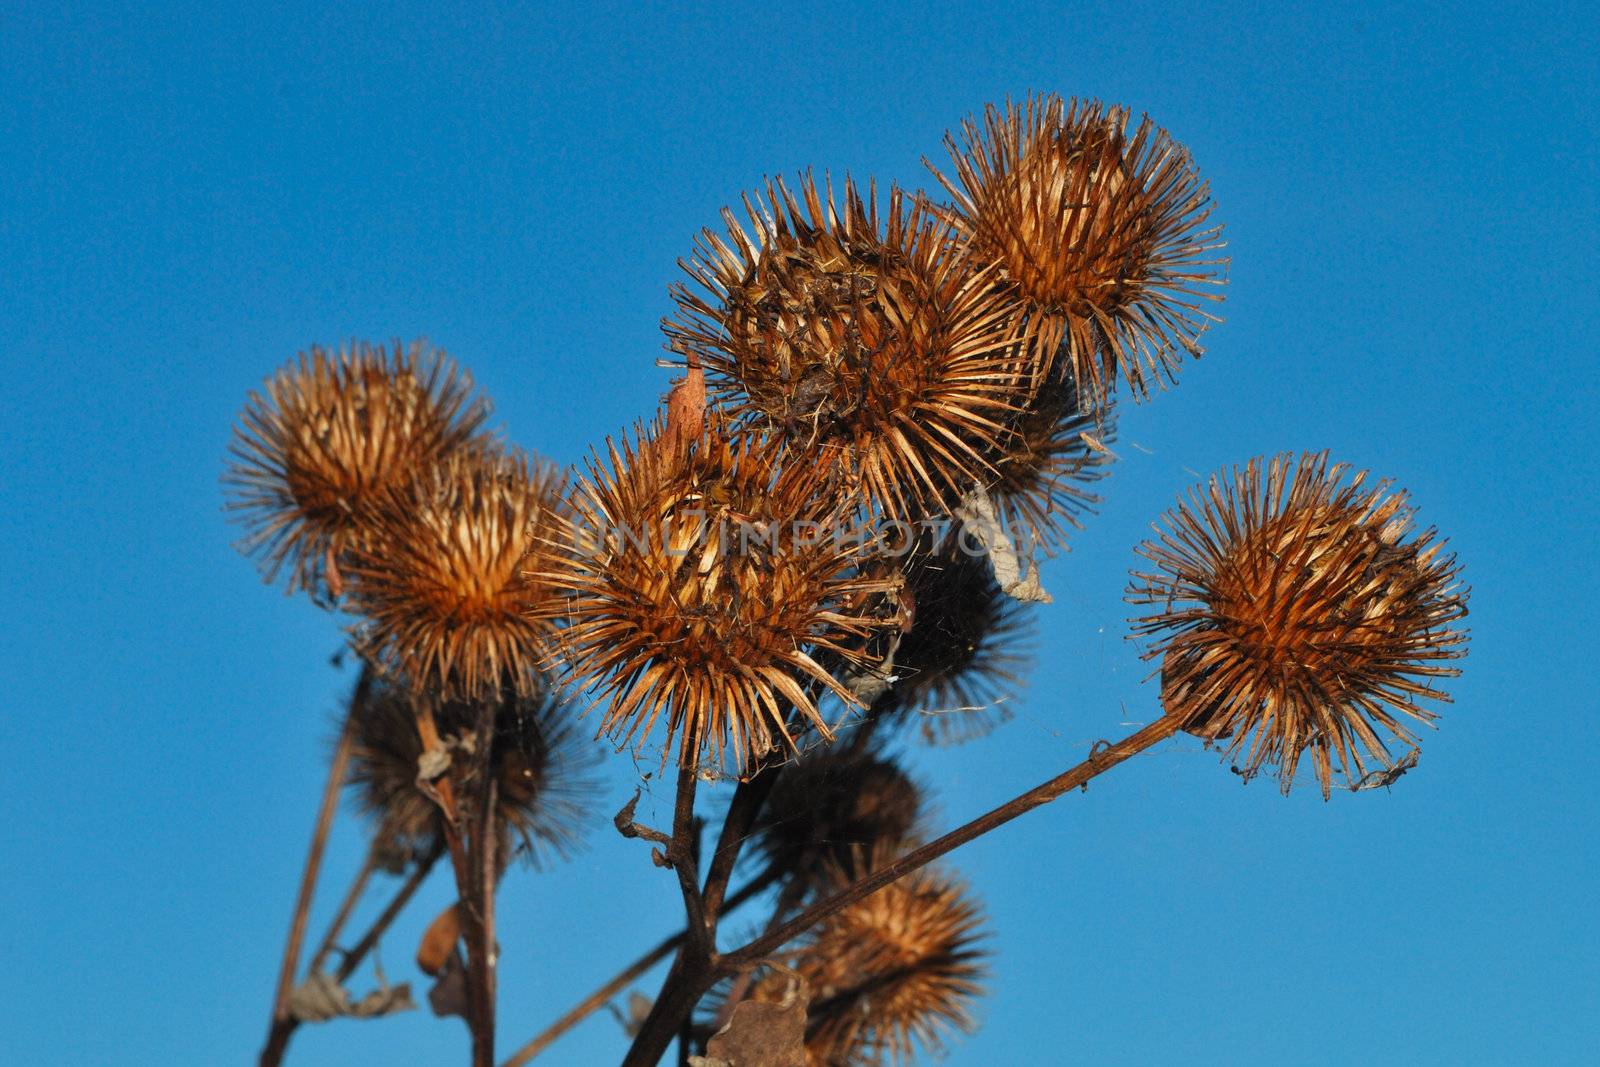 brown thistles by pauws99